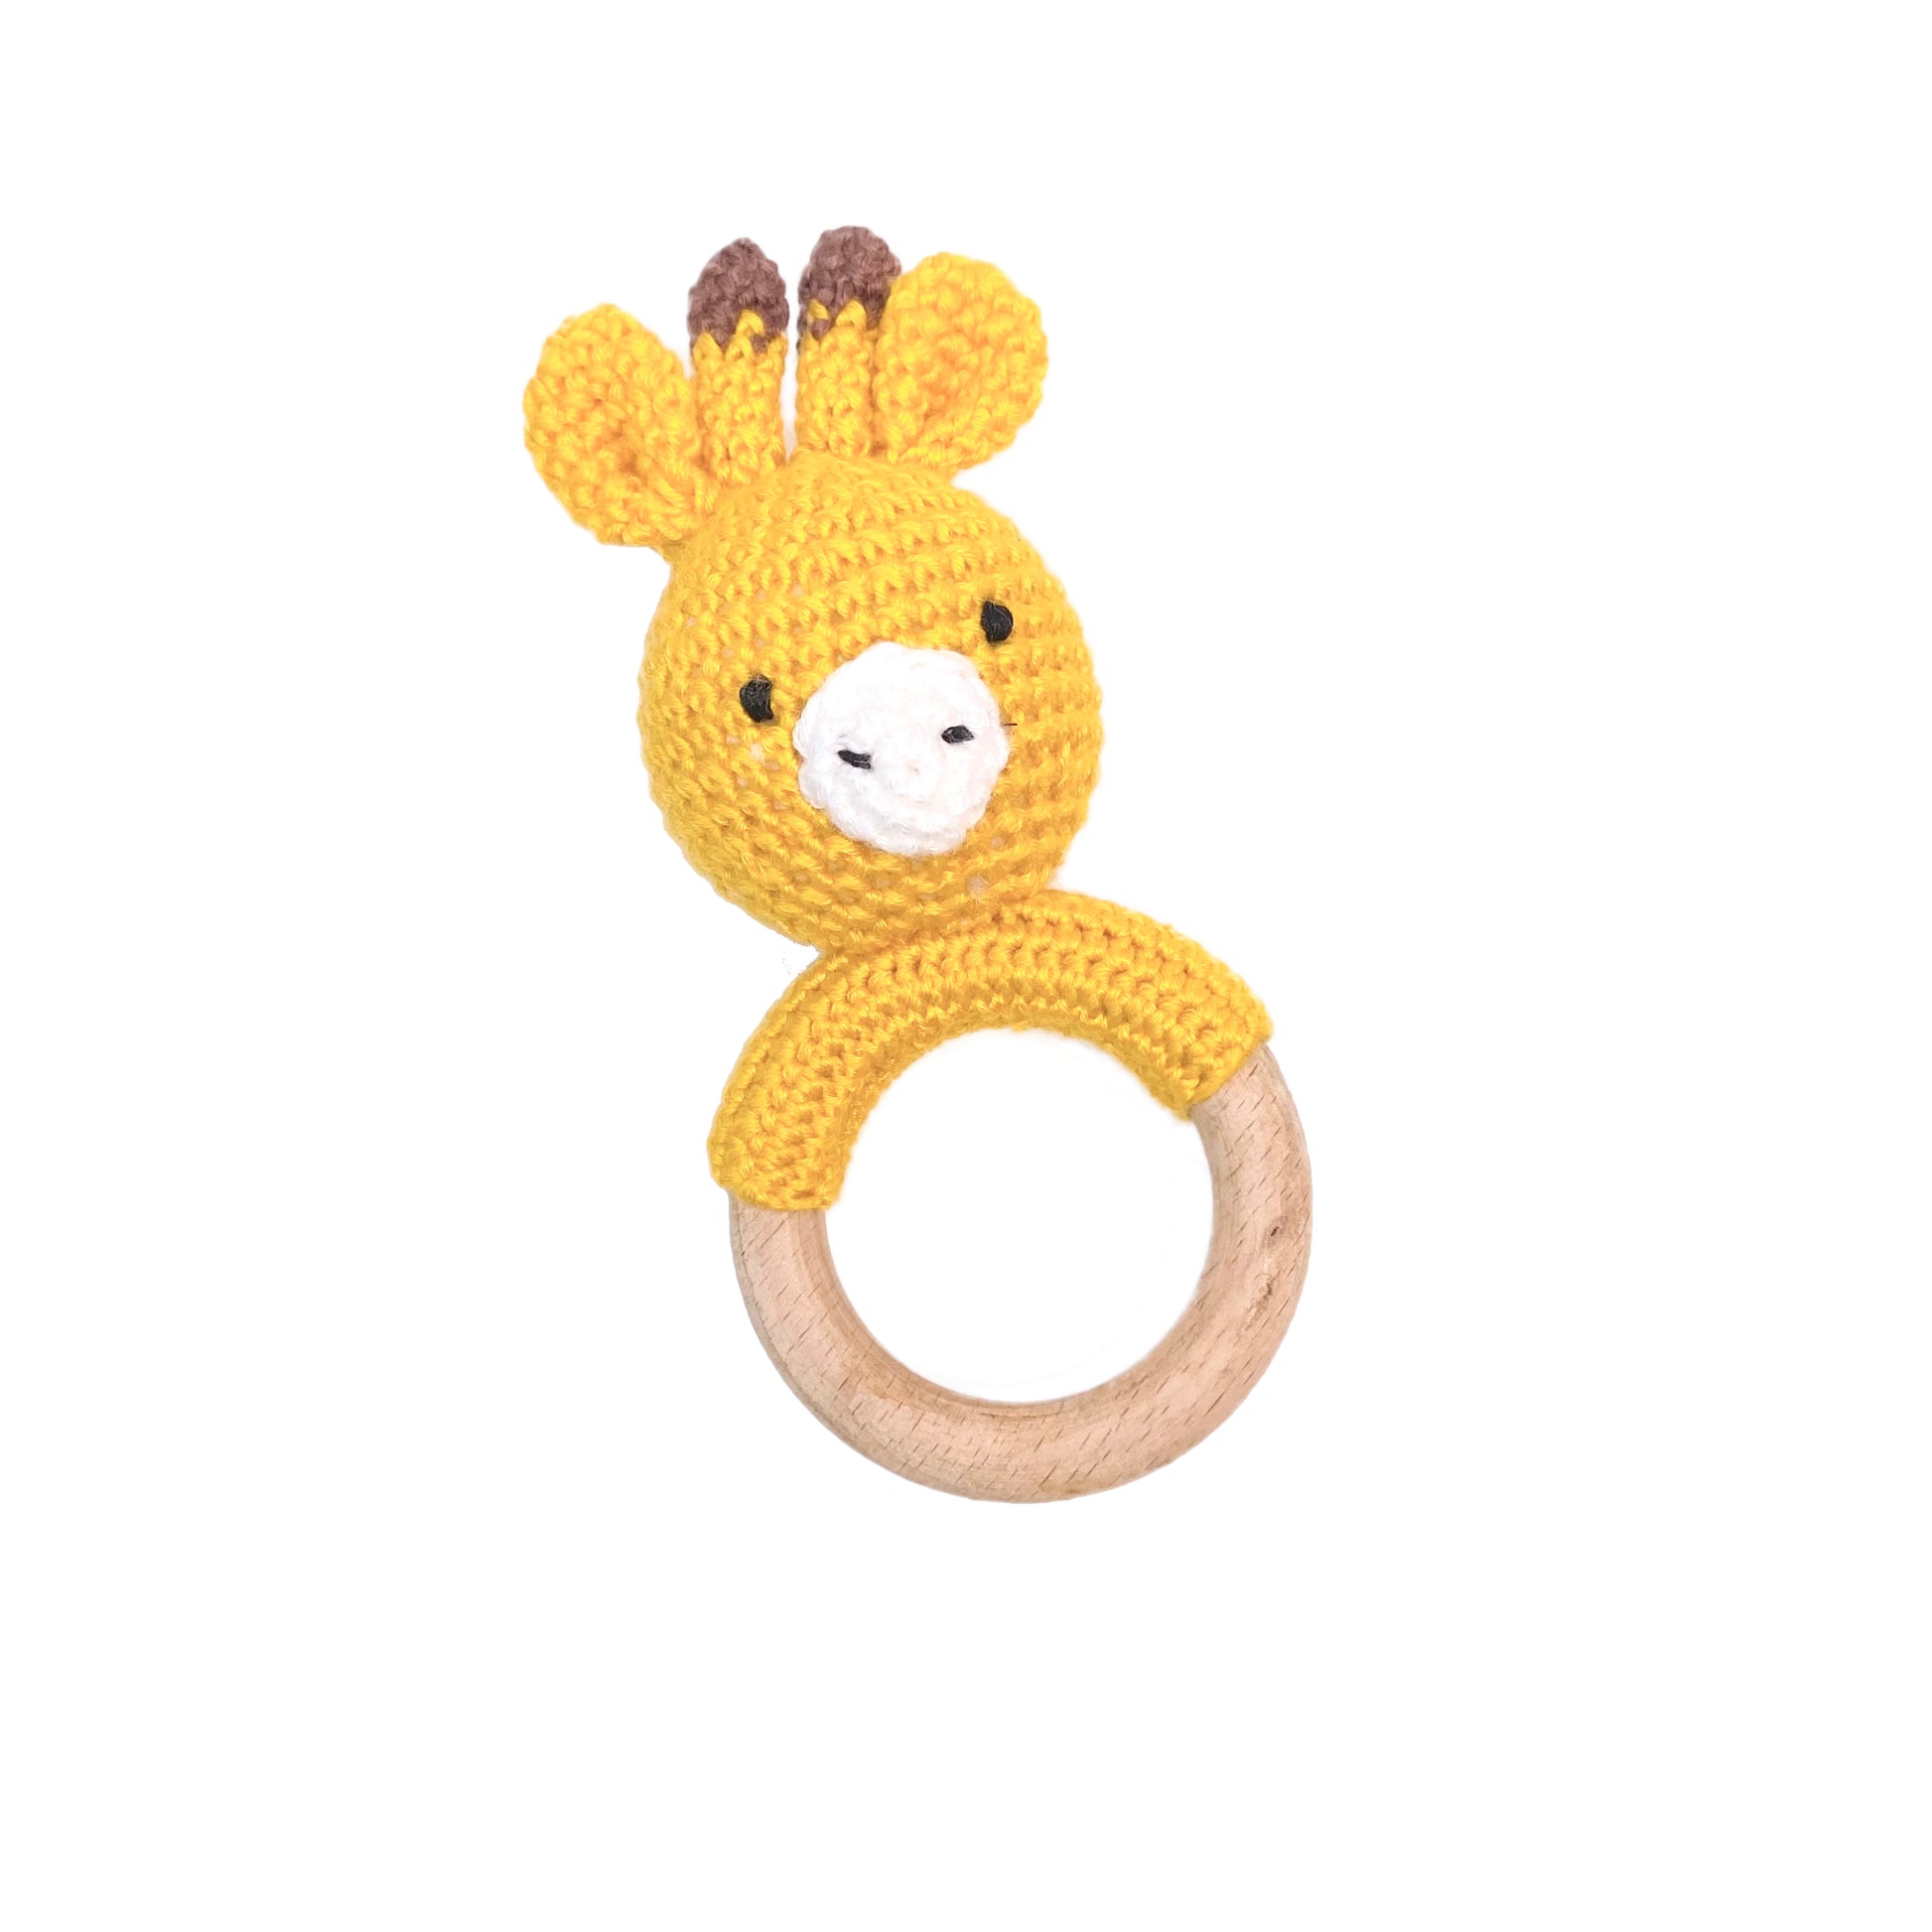 Baby rattle in a giraffe design, made from wool and bamboo.